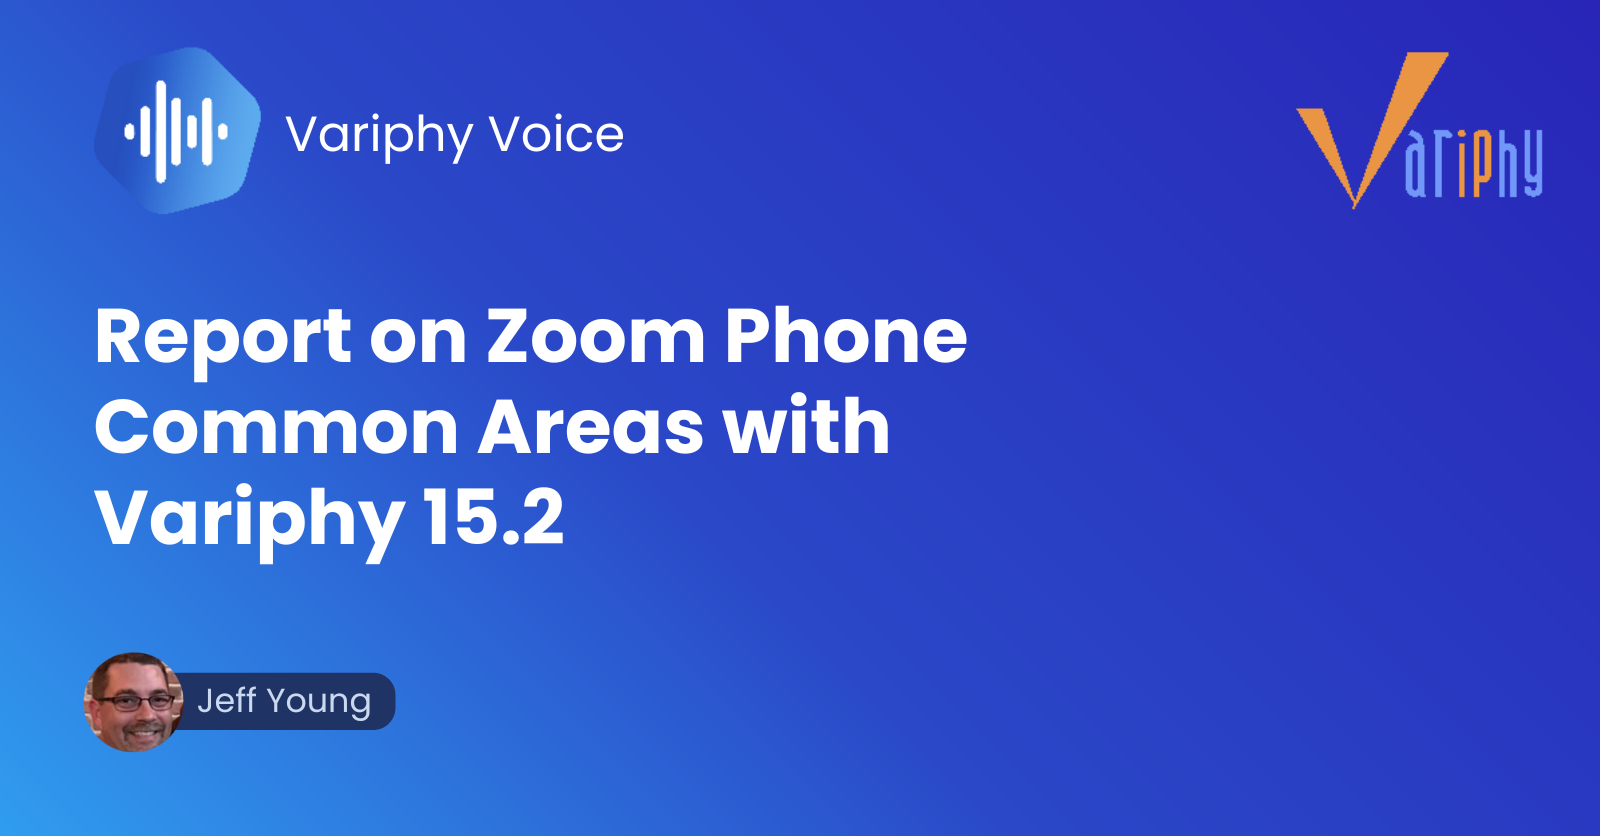 Report on Zoom Phone Common Areas with Variphy 15.2